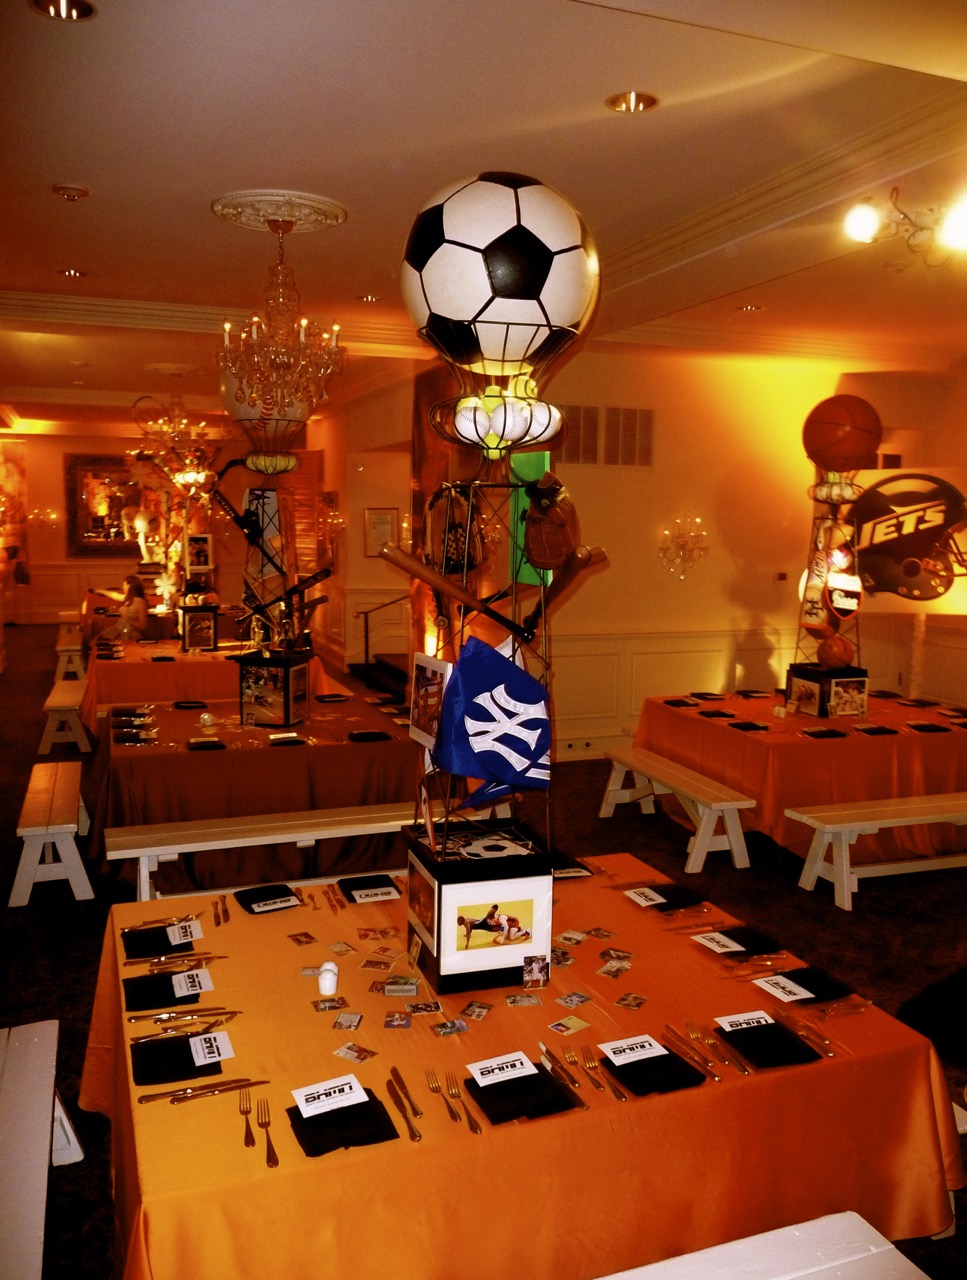 Sports Theme Centerpieces Decor and Lighting by Eggsotic Events NJ Event Design and Decor Rental  - 4.jpg